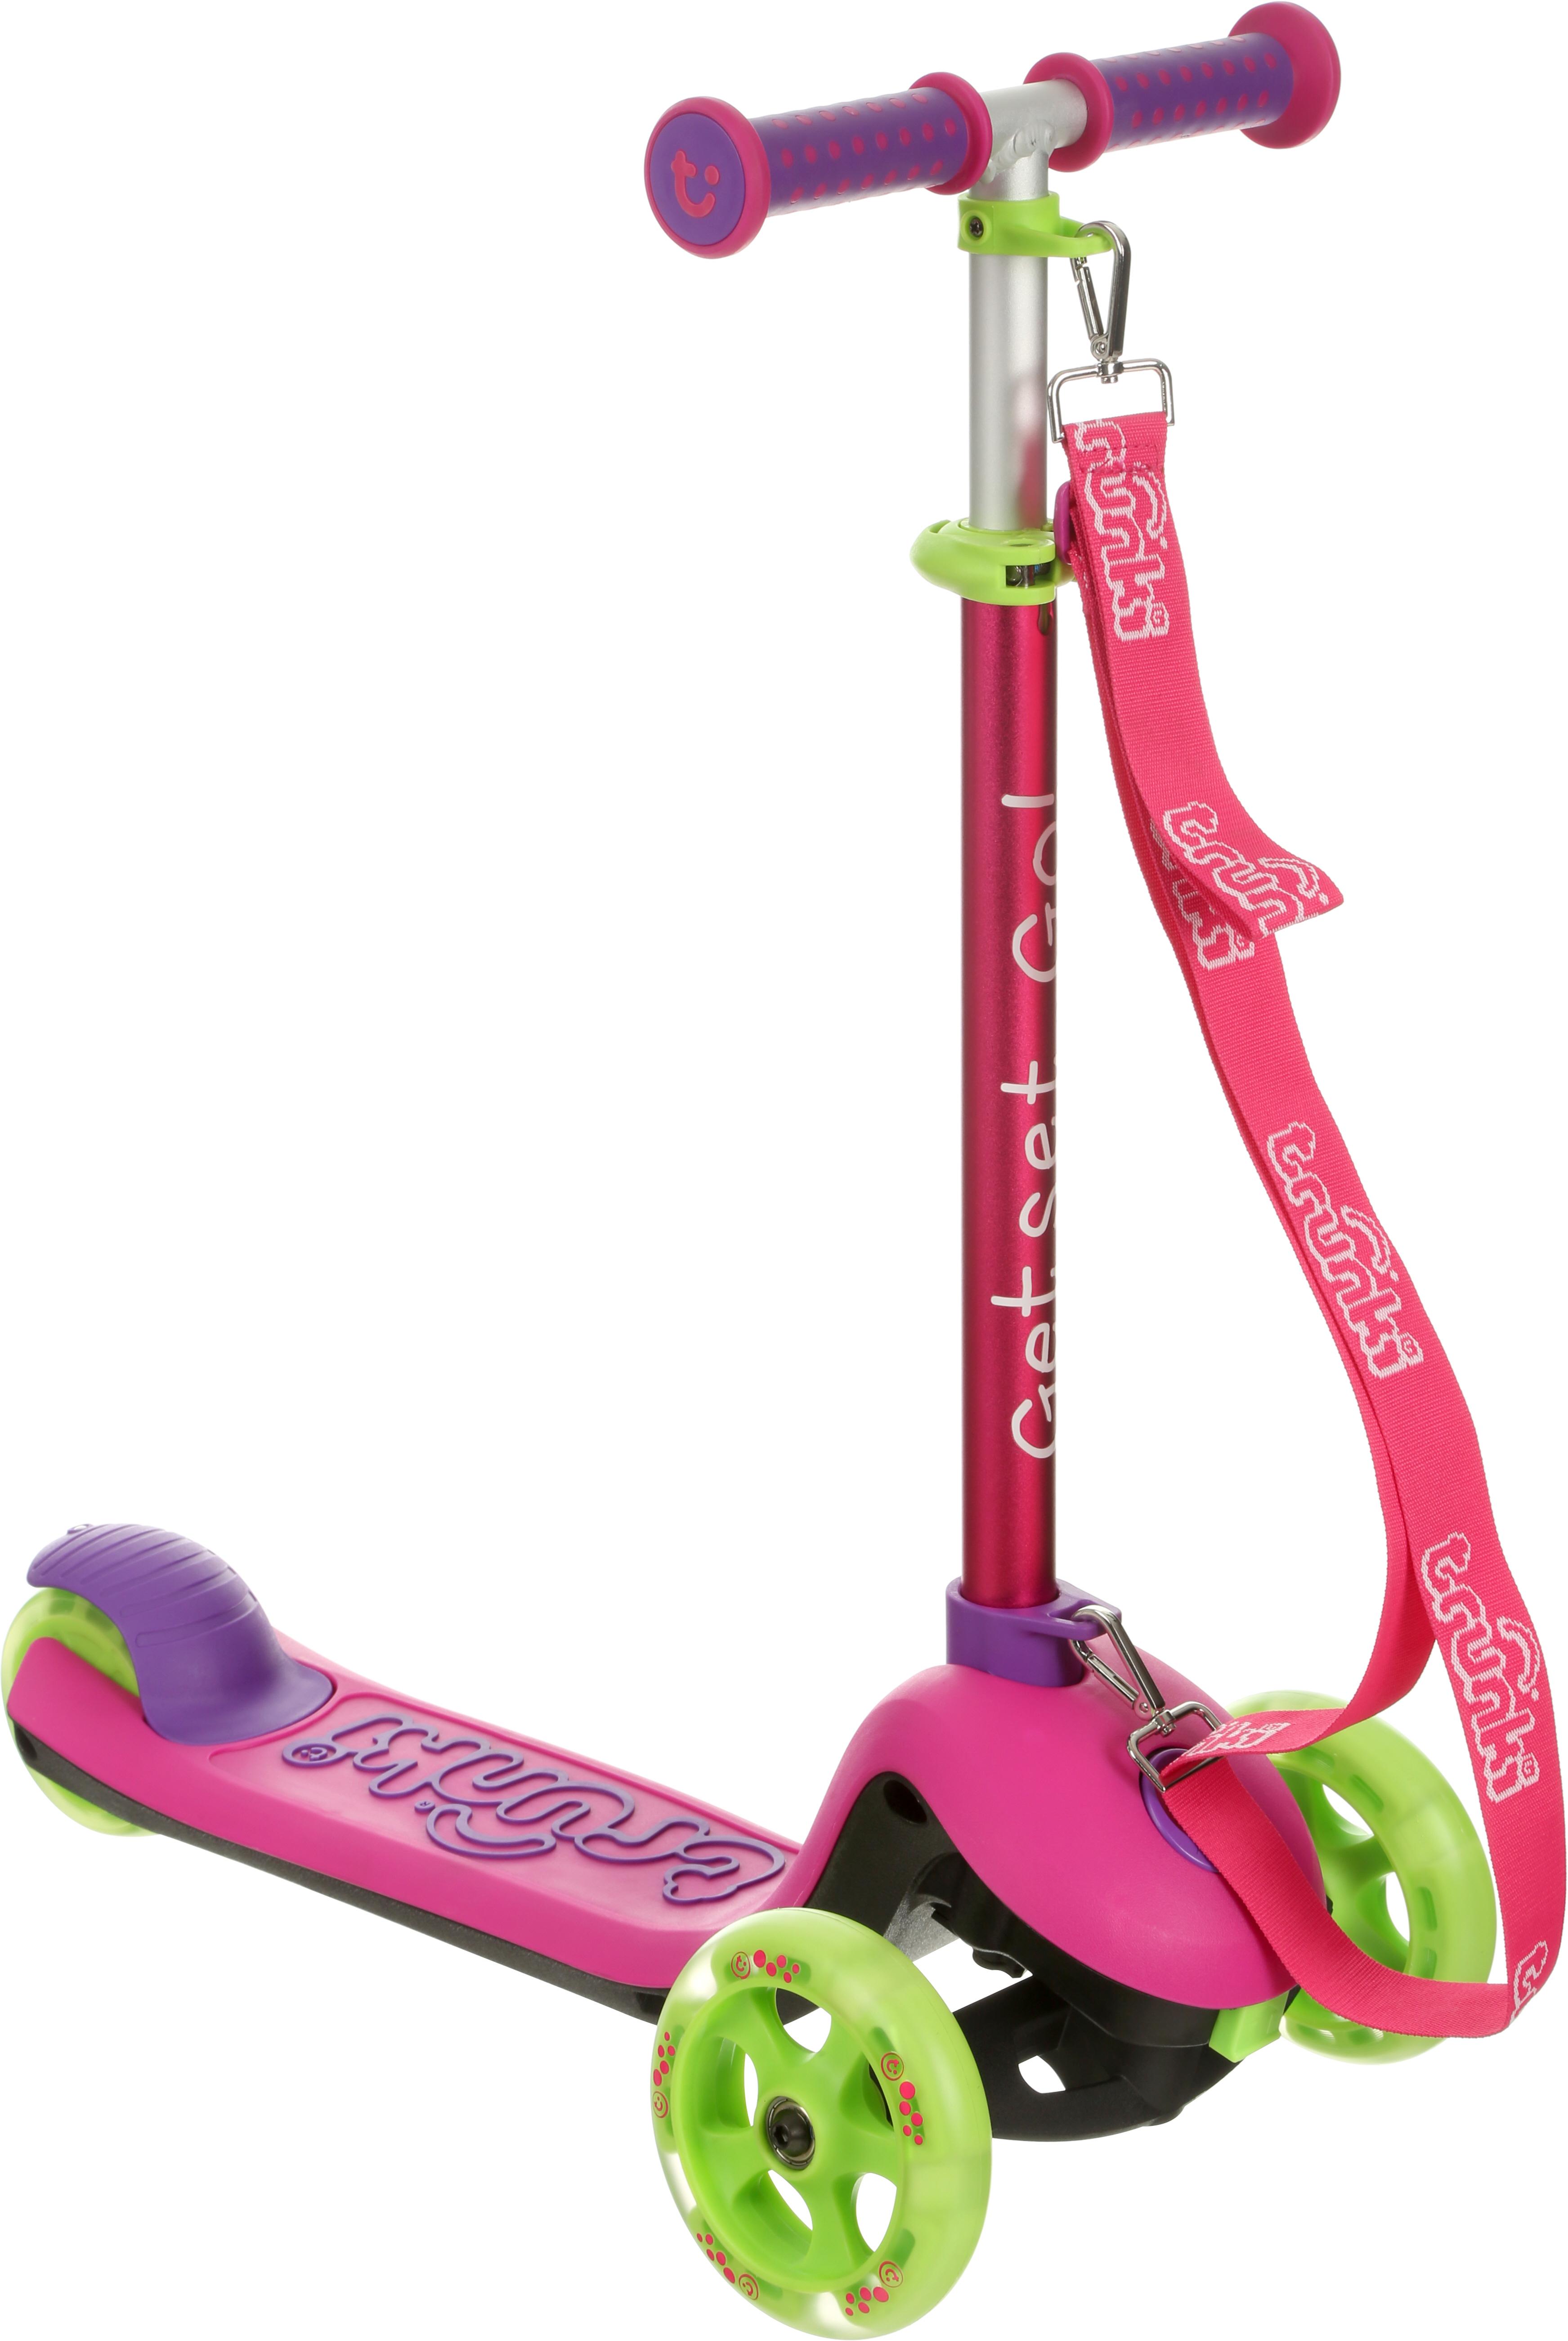 Trunki Small Folding Kids Scooter With Carry Strap - Pink